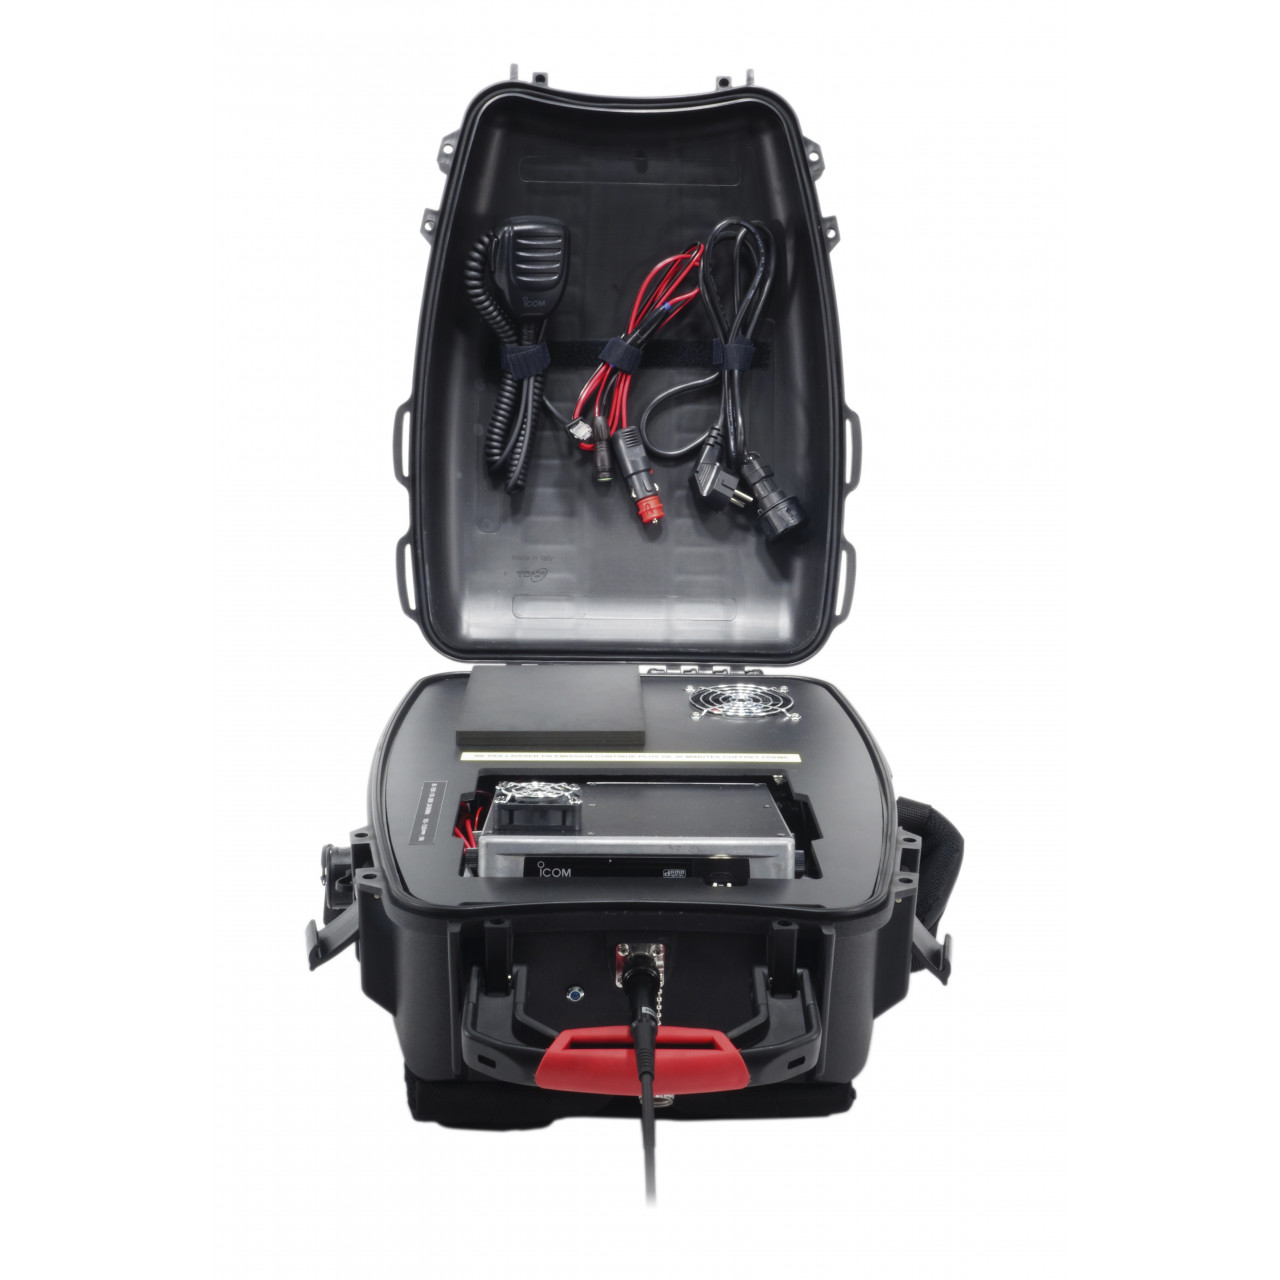 IF-BACKPACK-R6100 Repeaters - ICOM